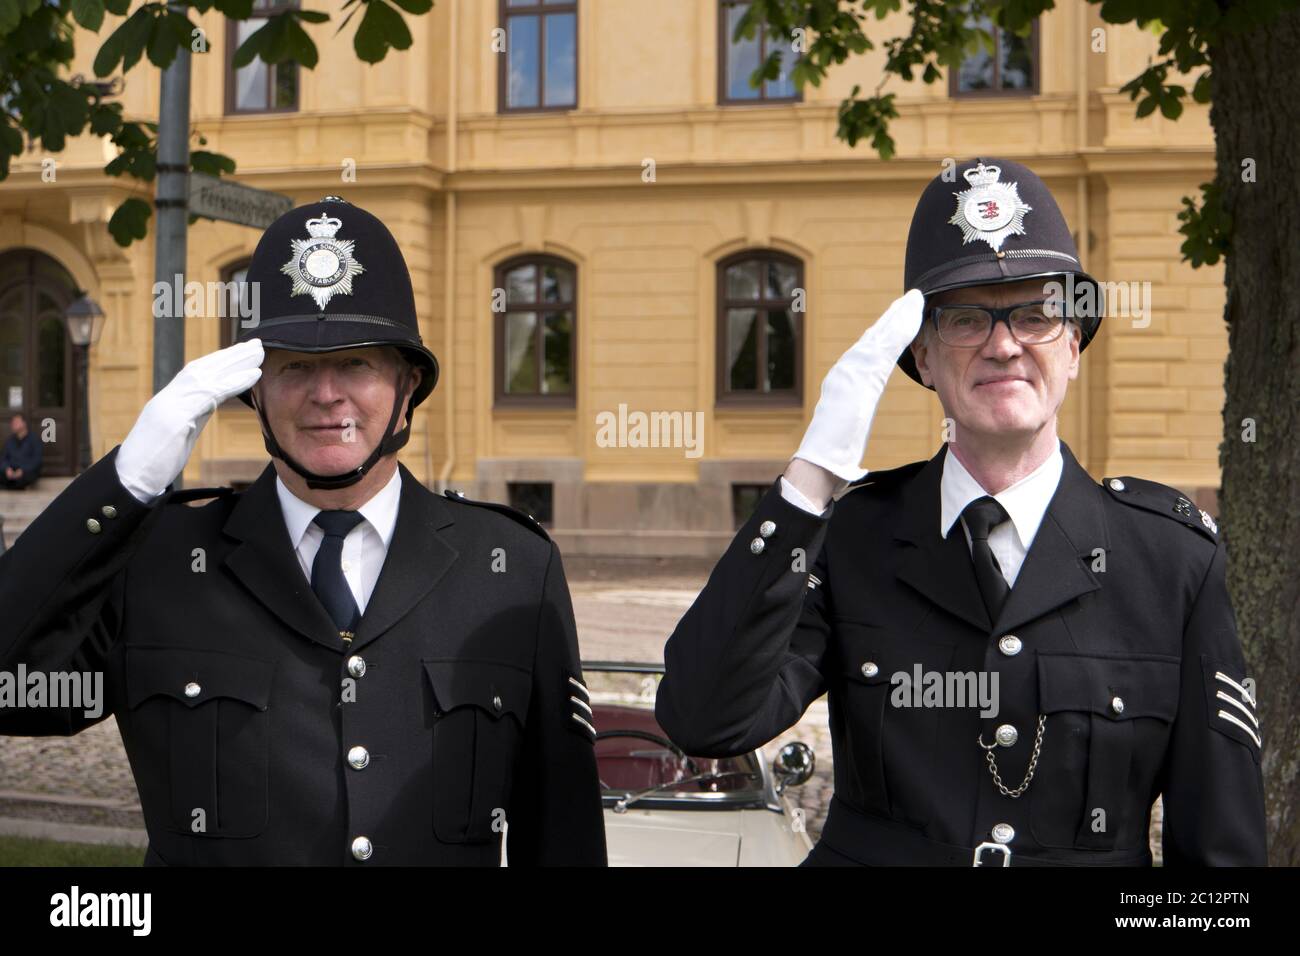 KARLSBORG, SWEDEN - AUGUST 14, 2016: Two London Bobbies posing in the Karlsborg Fortress in Sweden - editorial. Stock Photo